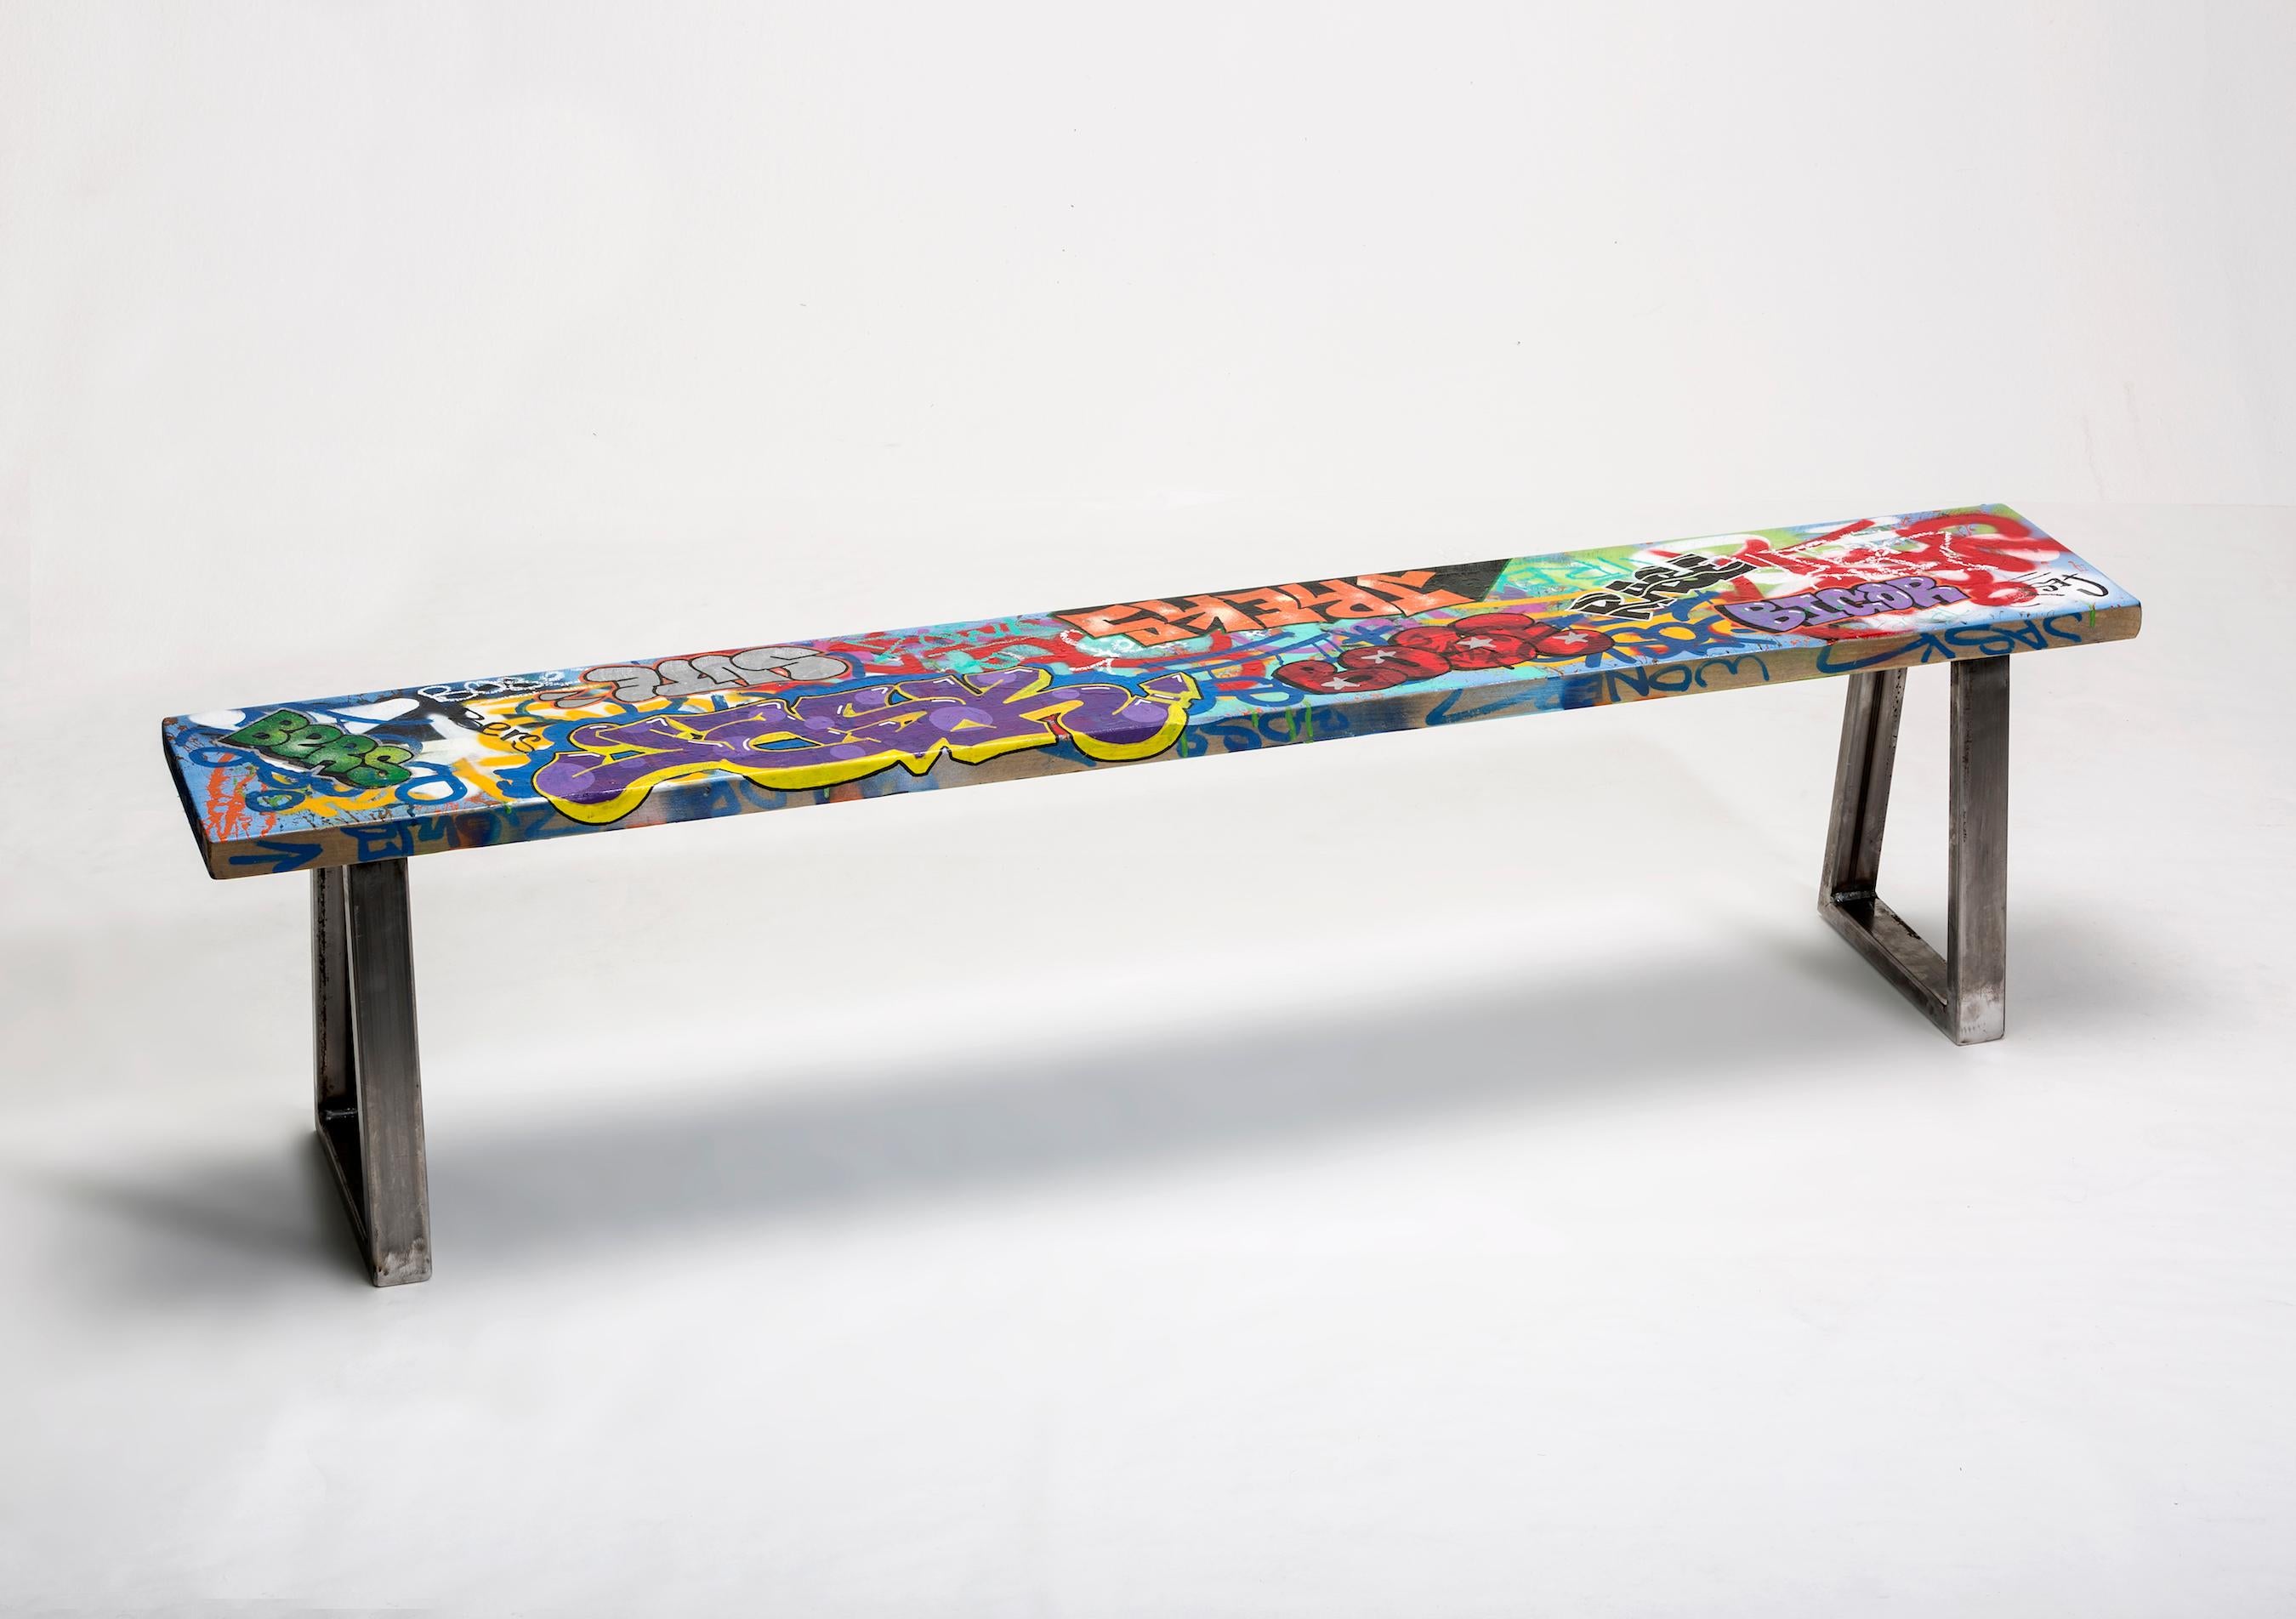 "Rase Alley" Large Colorful Graffiti Tagged Wood Bench